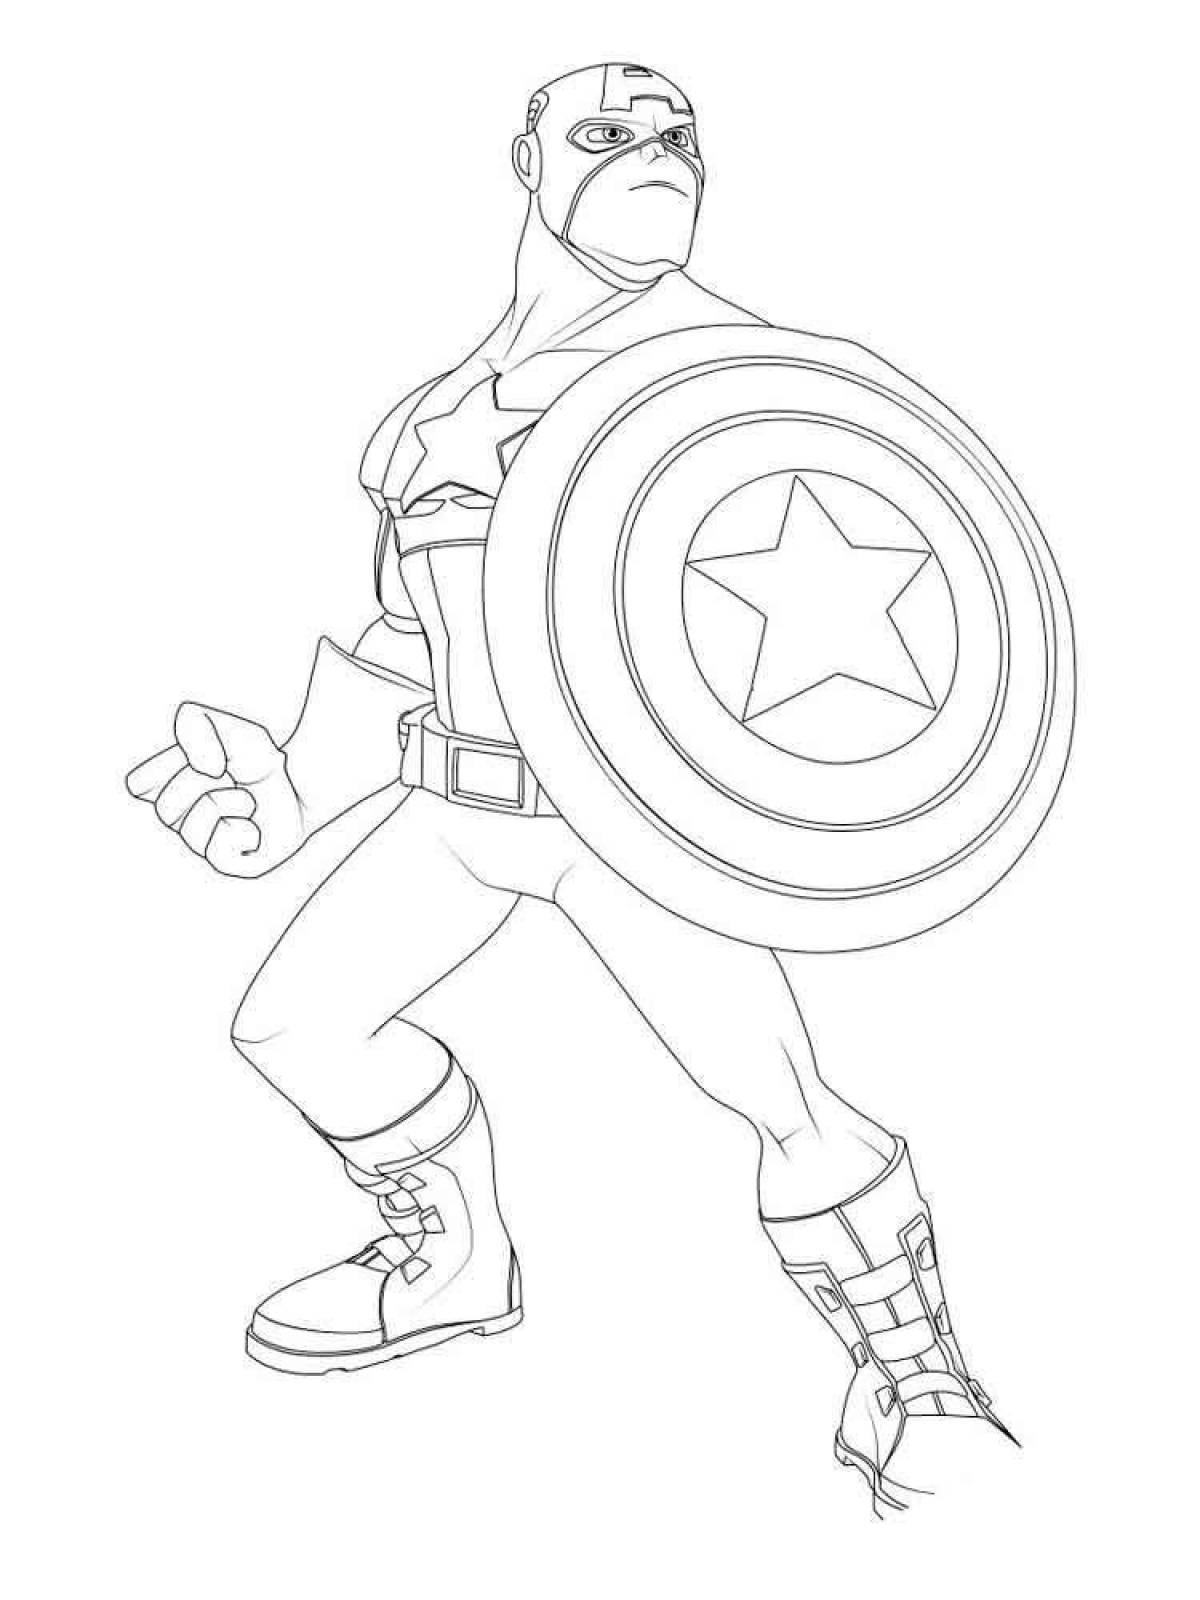 Captain America shining coloring page